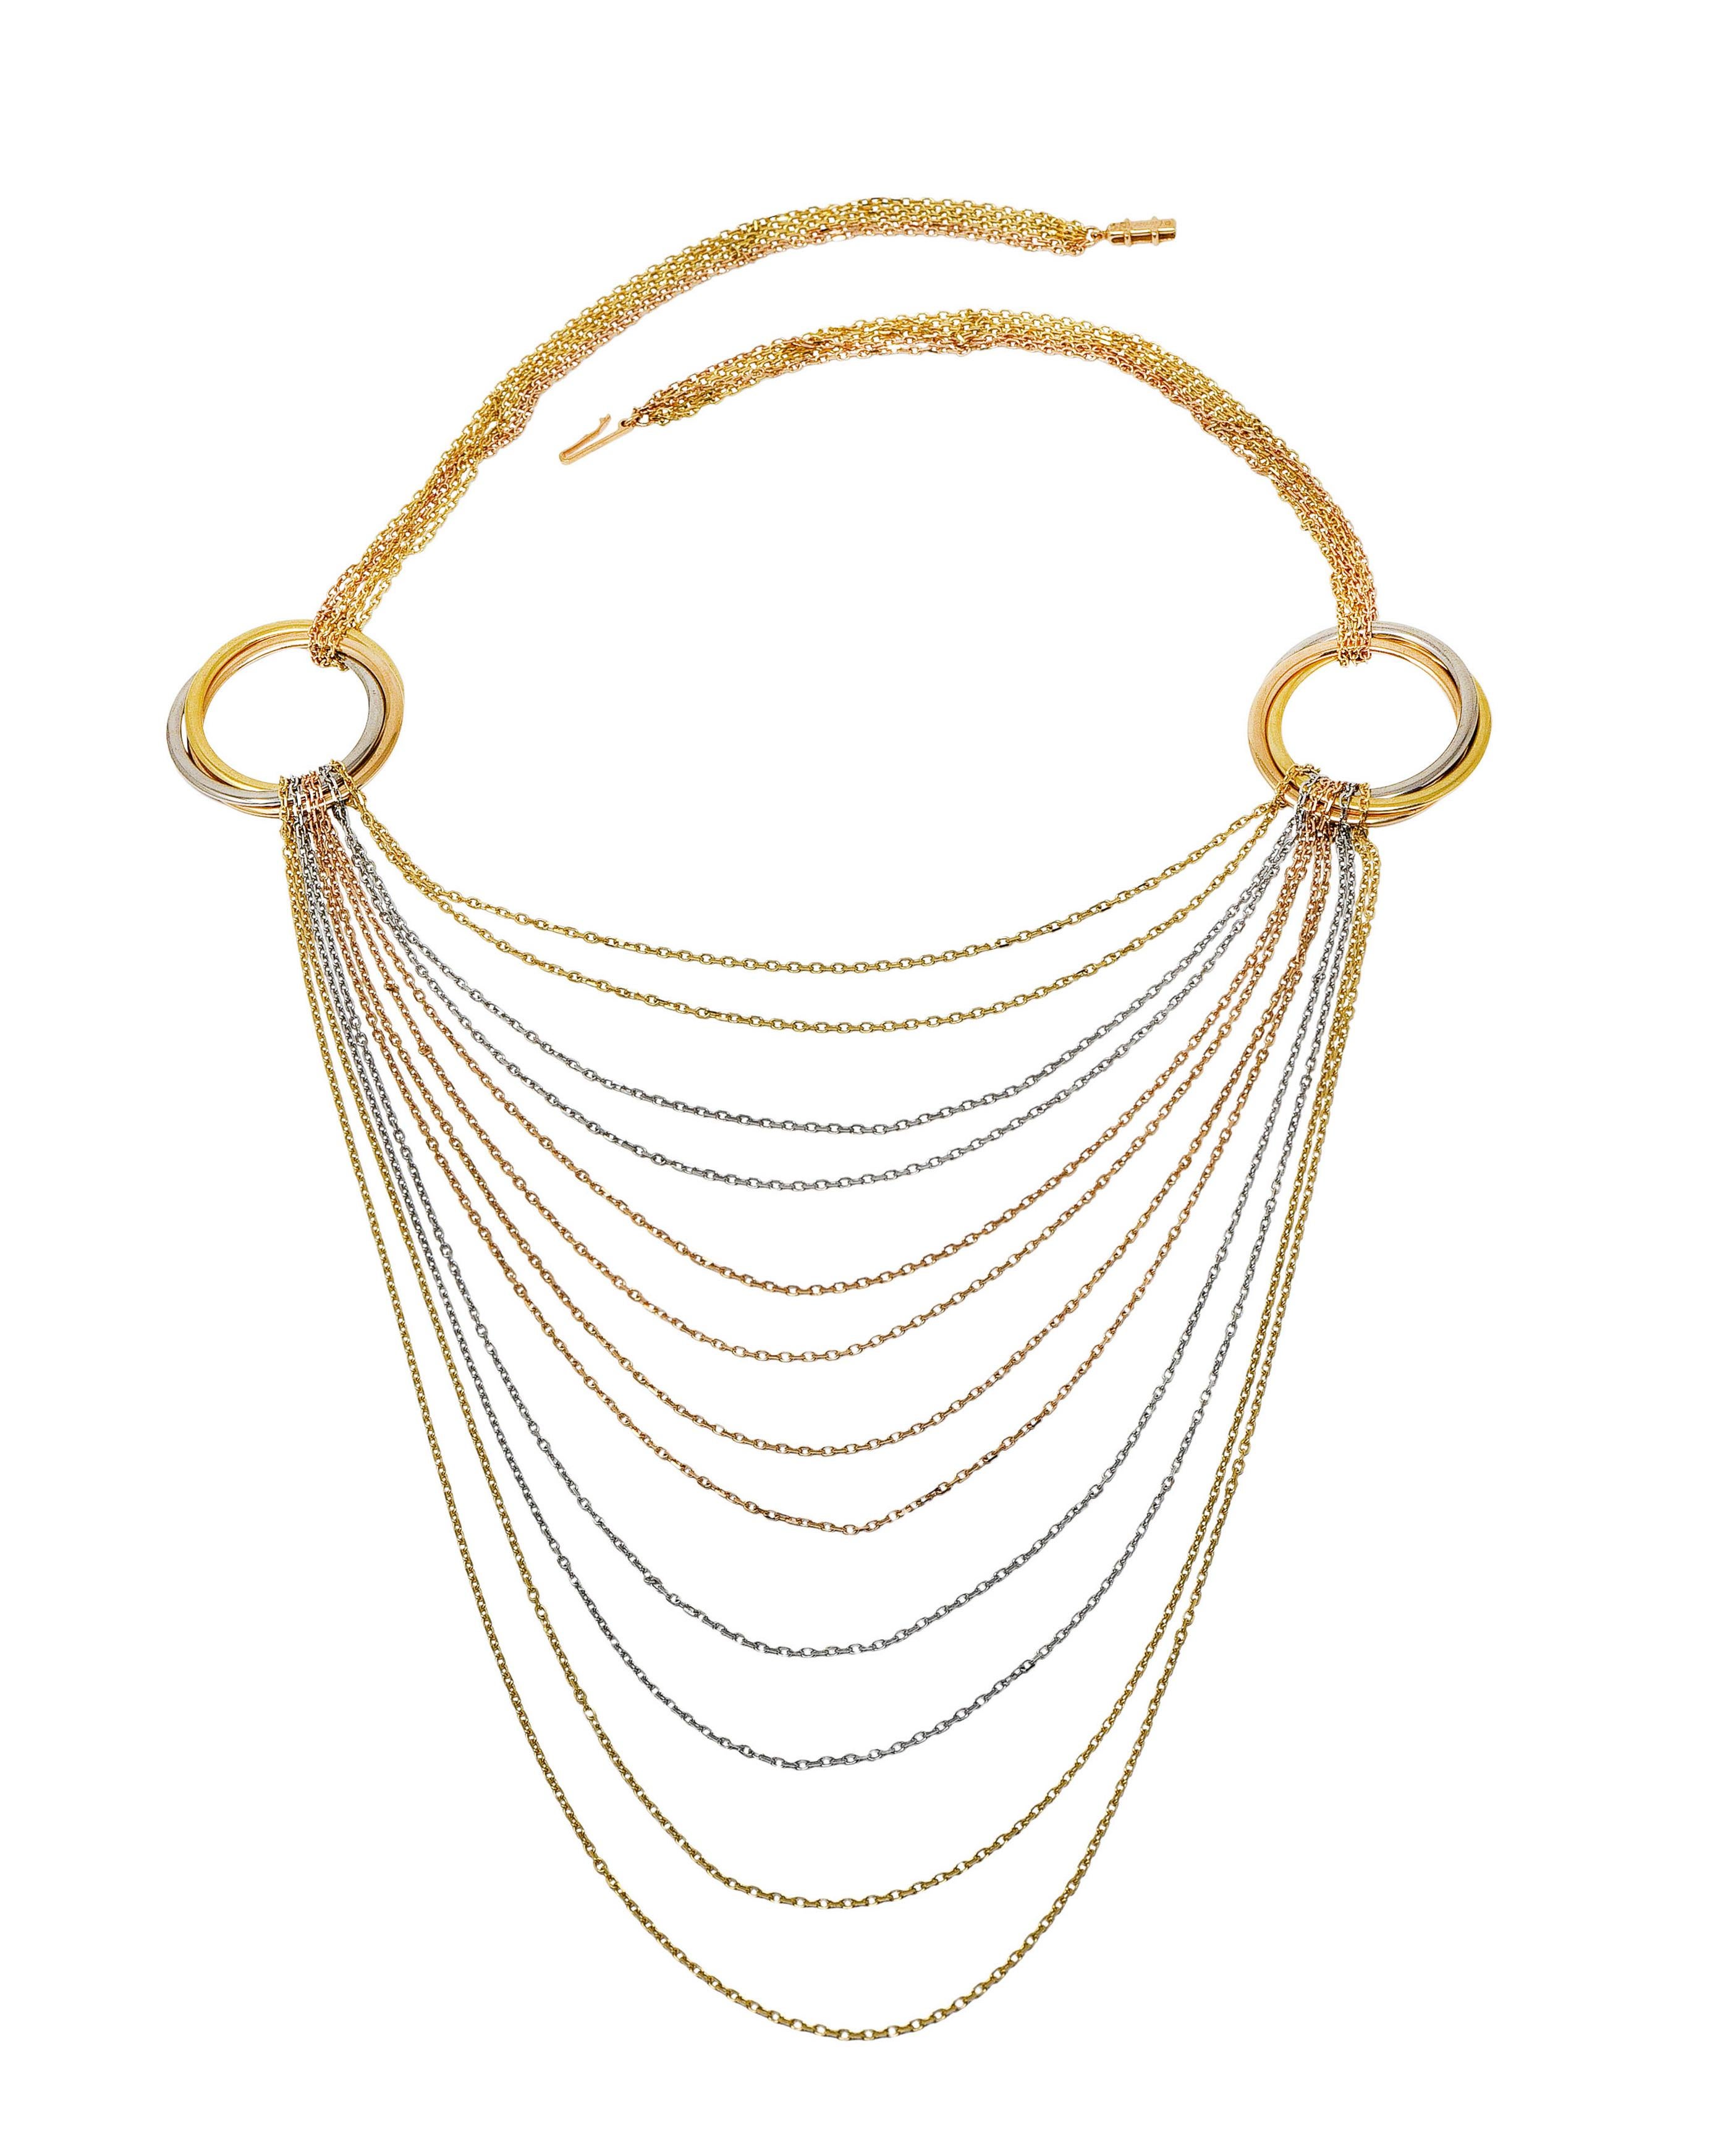 Necklace is comprised of multiple strands of rose, white, and yellow gold chain

With two 35.0 mm circular stations - designed as intertwined tri-colored gold rings

Stations suspend additional chain strands in a swagged drapery style

Completed by